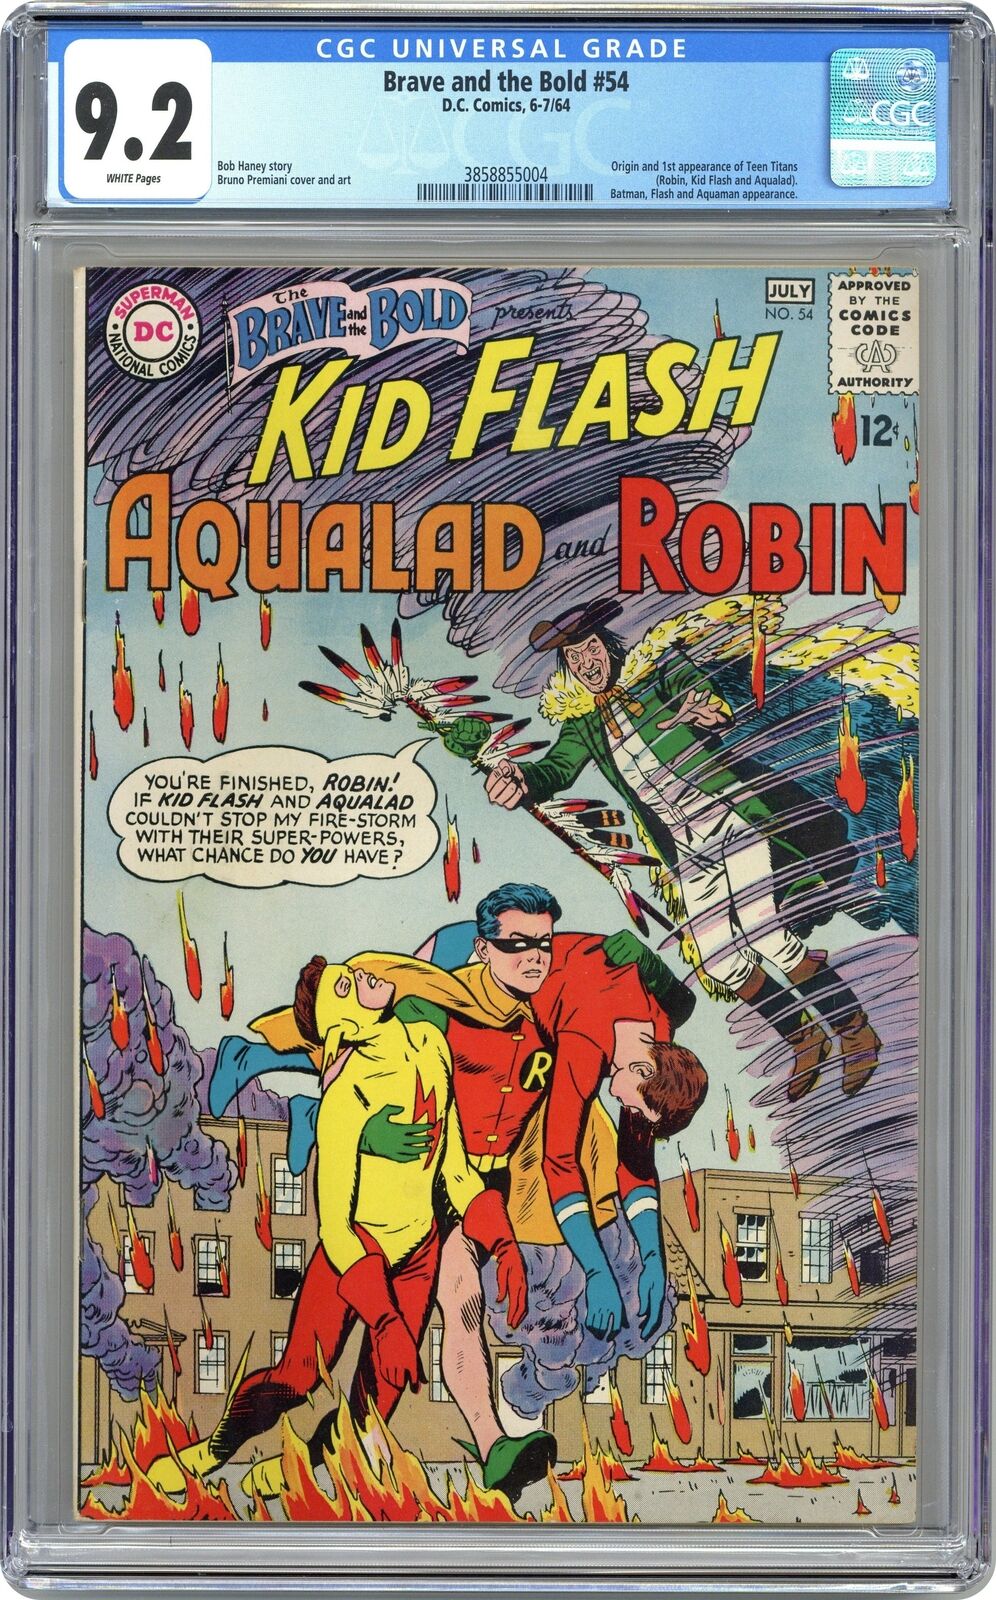 Brave and the Bold #54 CGC 9.2 1964 3858855004 1st app. and origin Teen Titans